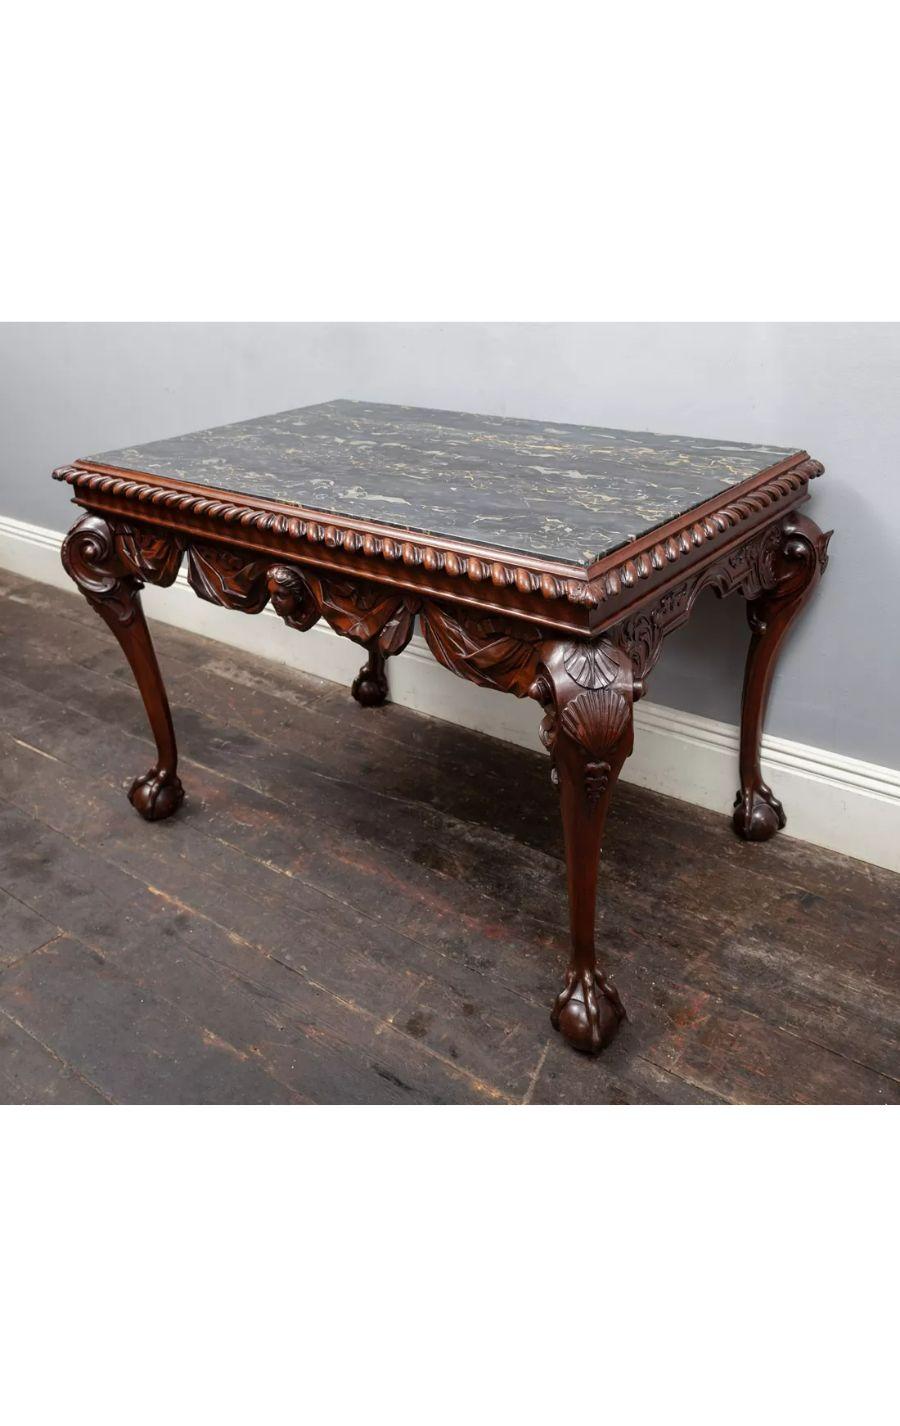 An antique carved Walnut console table with Portoro Nero marble top.

The frieze is beautifully carved with swags of drapes centred with a female mask. The canted legs with scallop shells carved on the knees, terminate with ball and claw feet. A